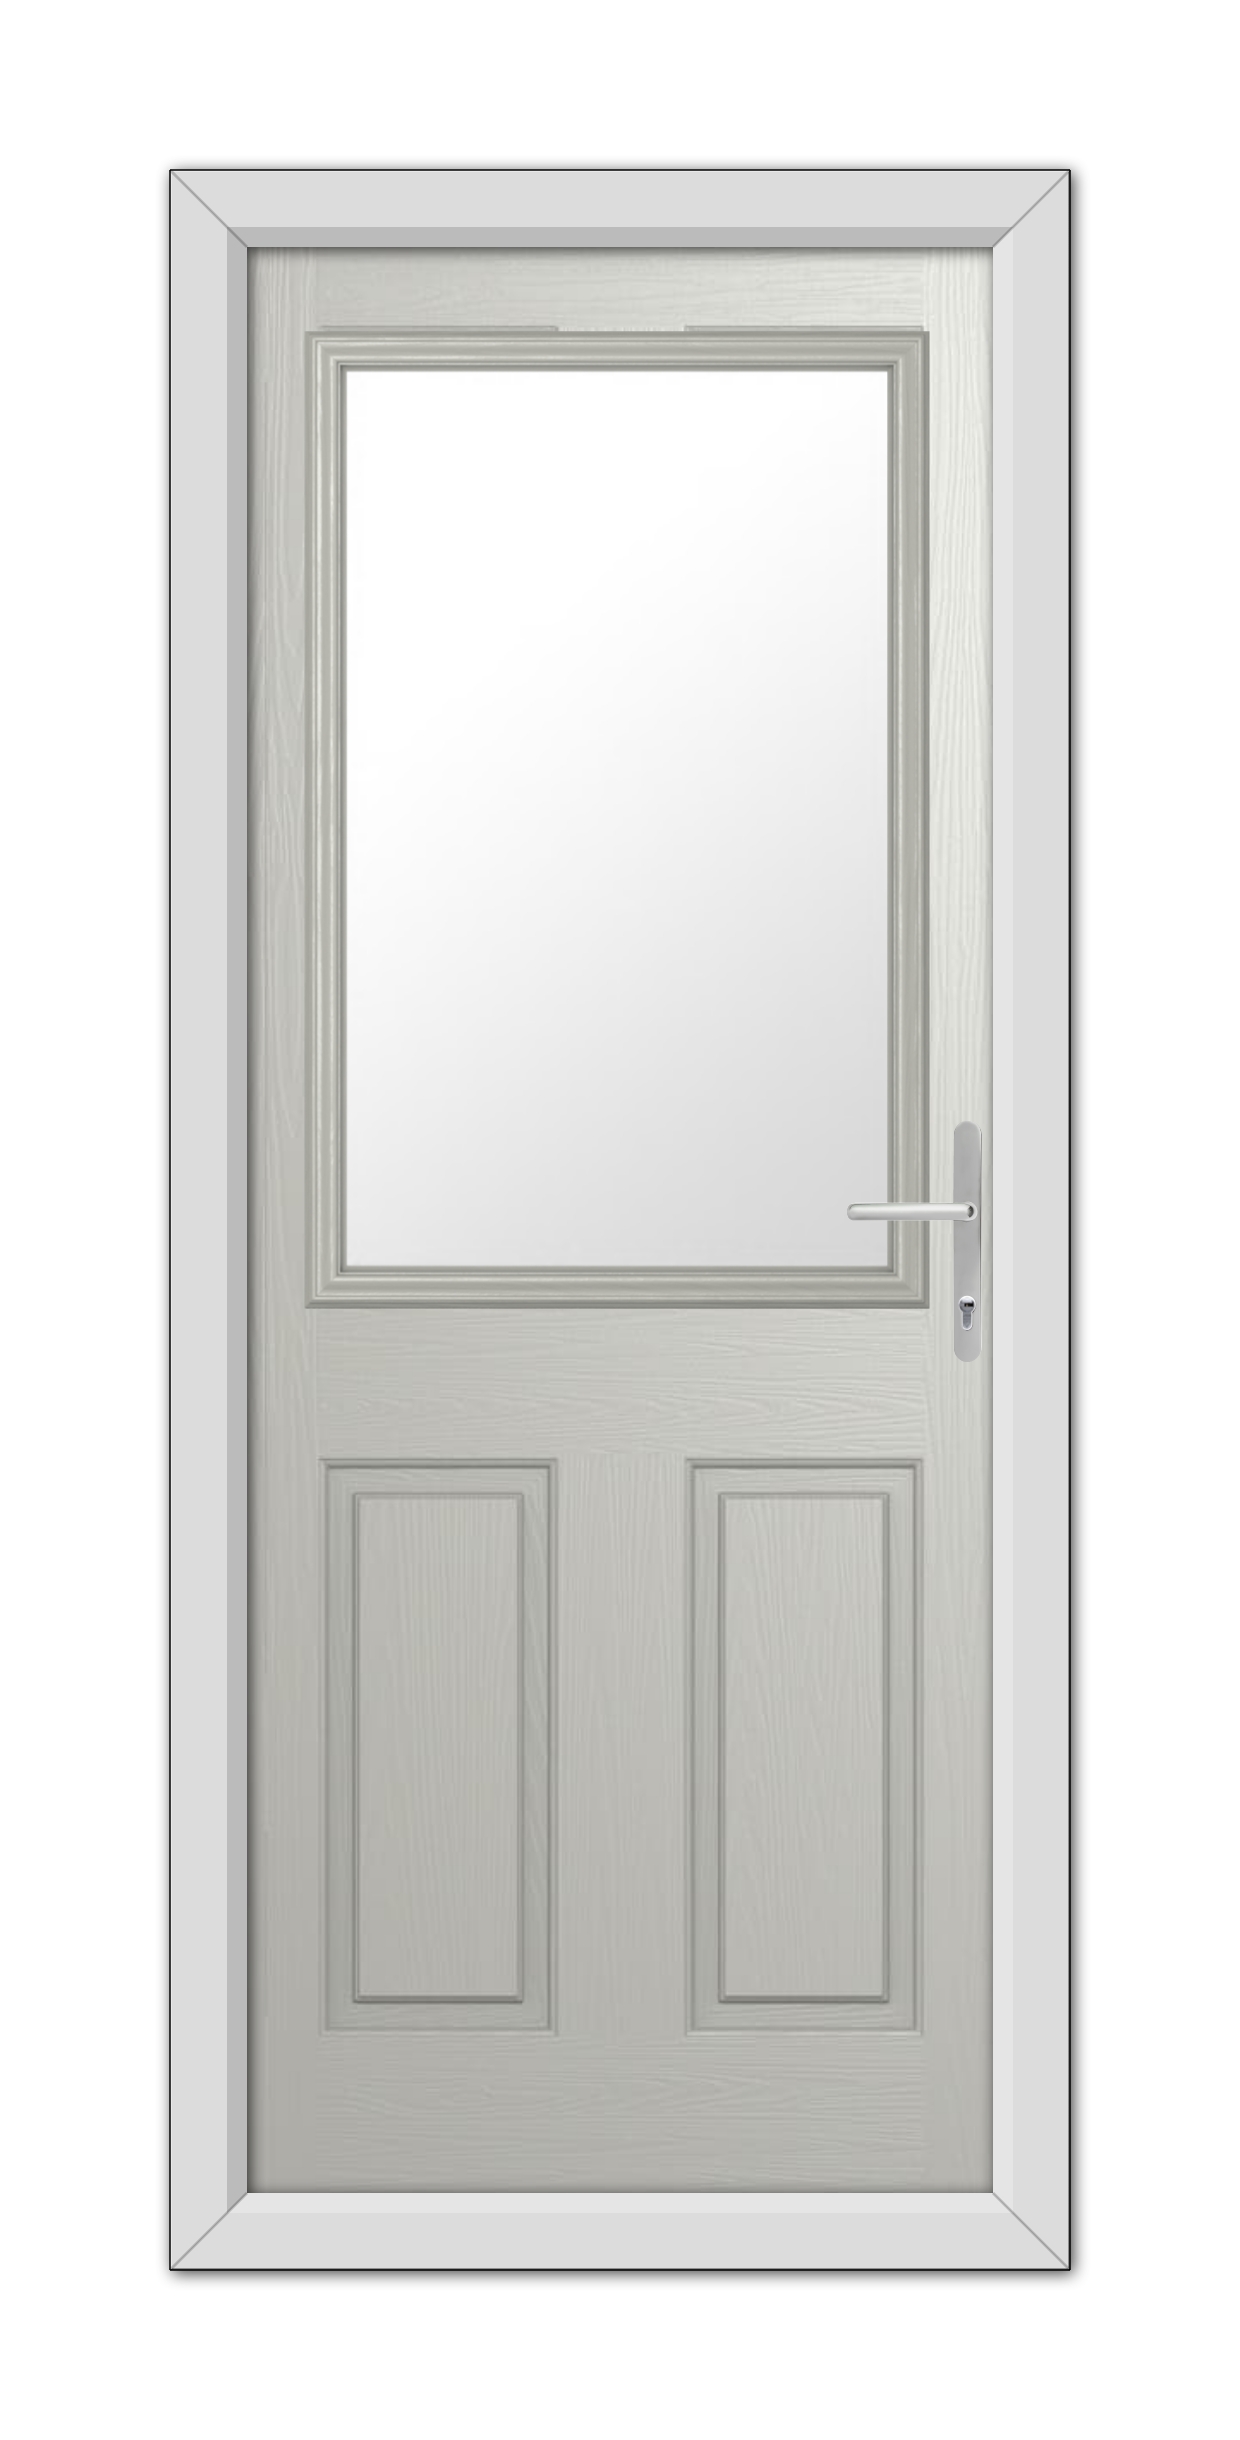 A modern Agate Grey Buxton Composite Door 48mm Timber Core with a vertical handle and a large frosted glass panel, framed by a simple white trim.